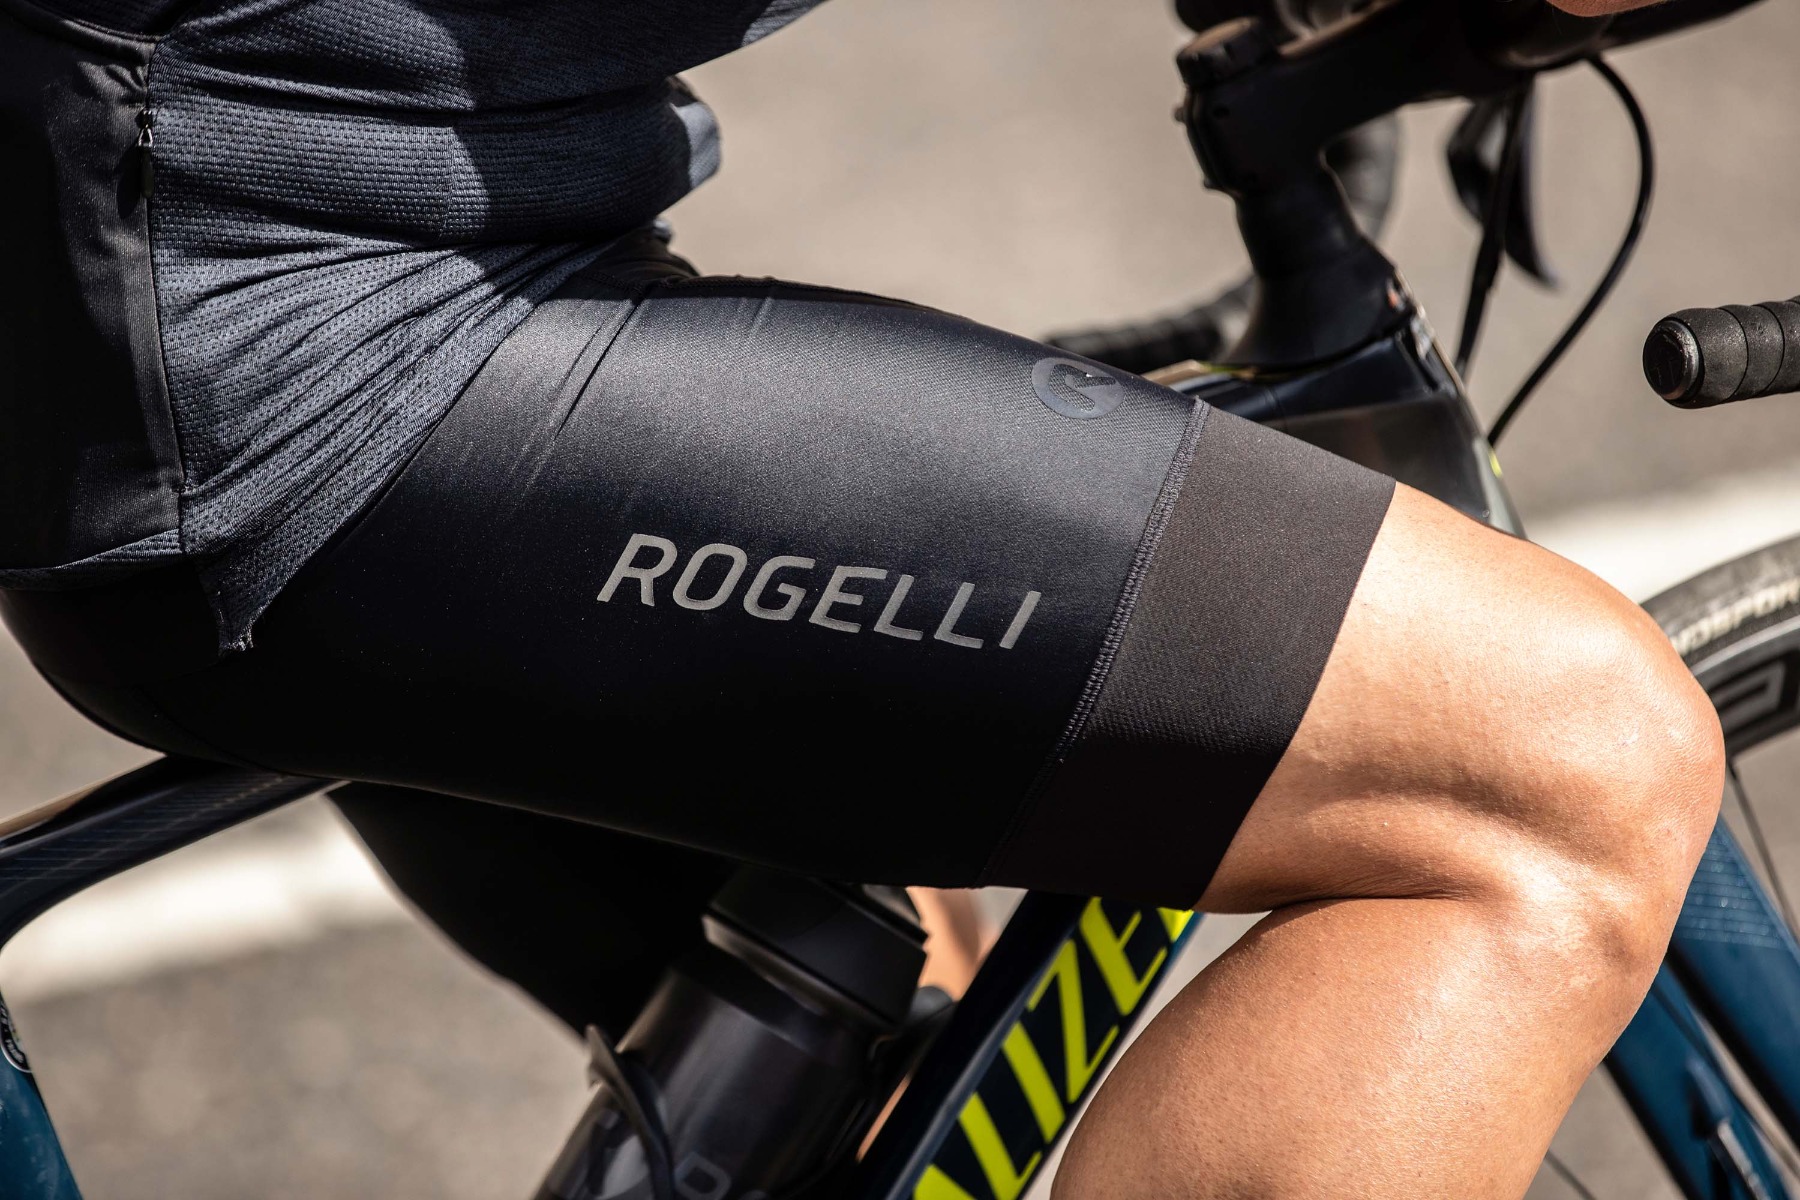 Detail photo of a Rogelli cycling shorts